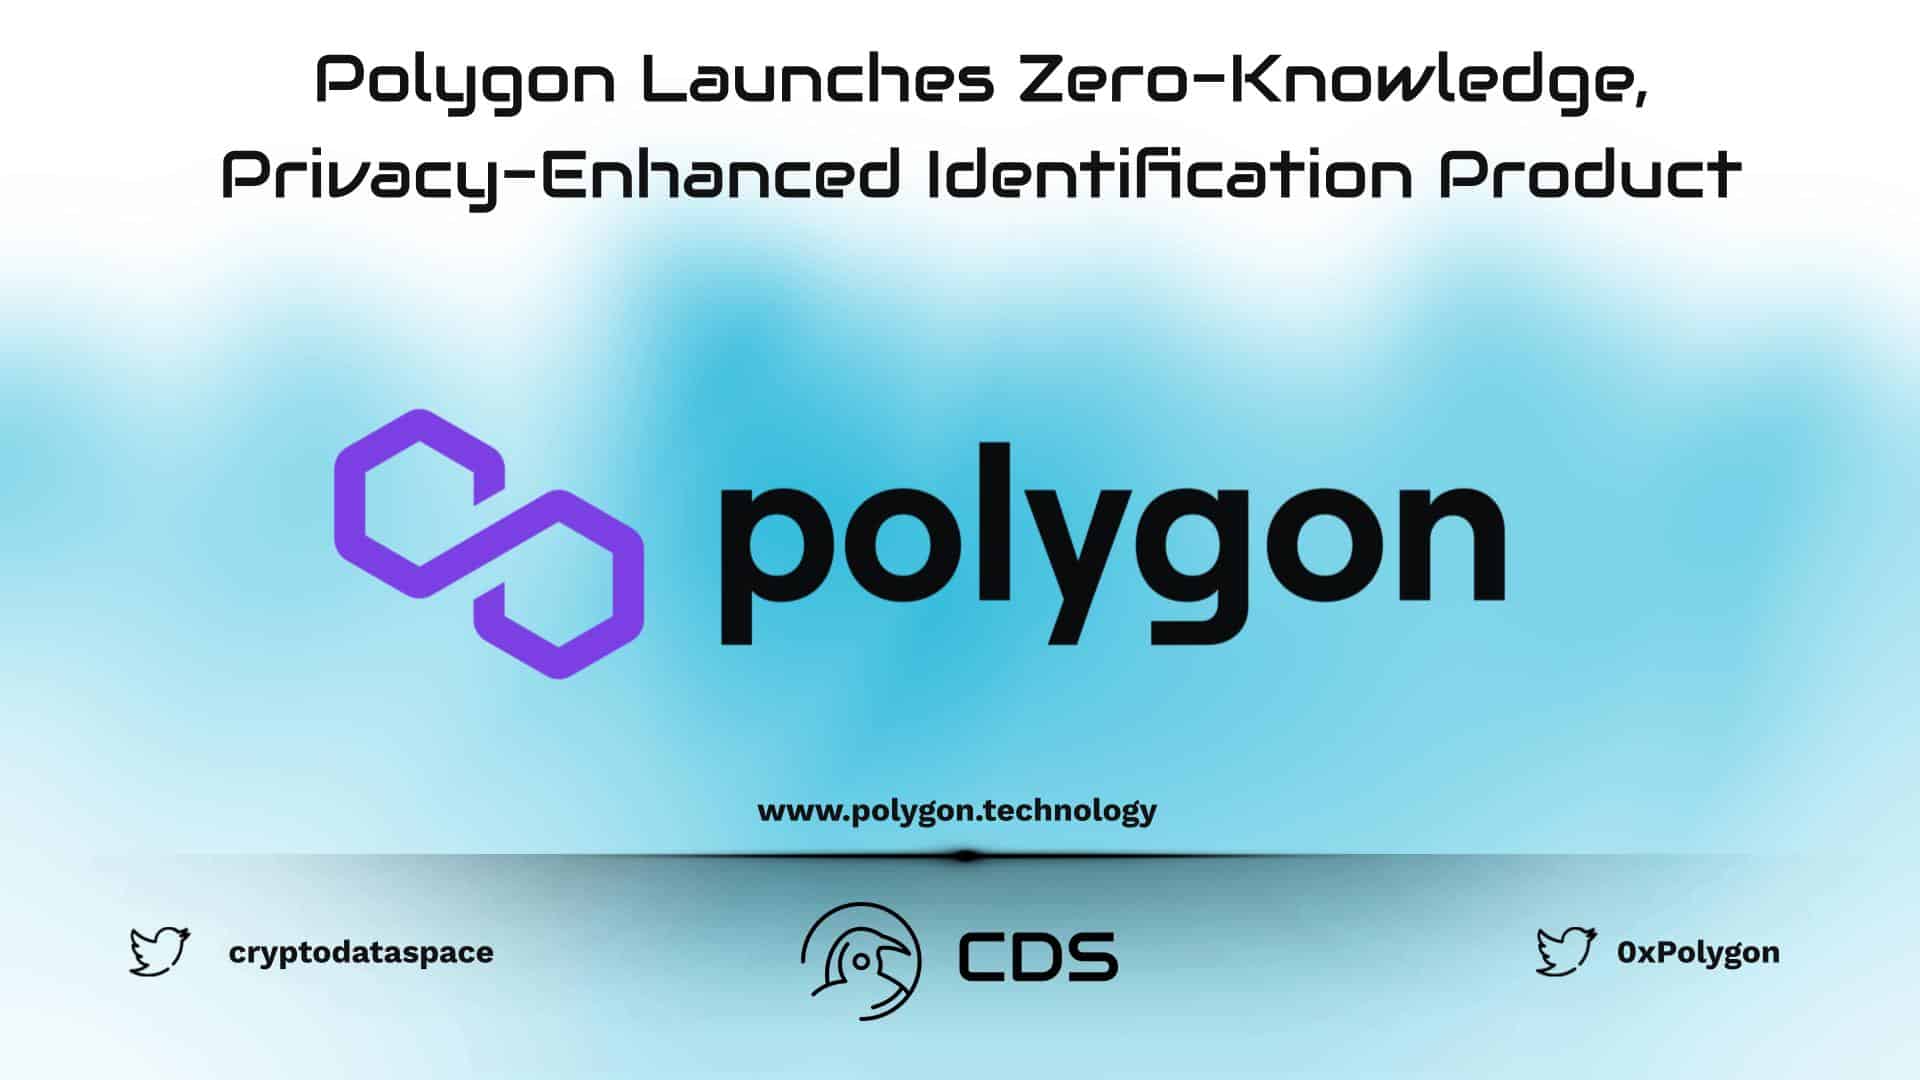 Polygon Launches Zero-Knowledge, Privacy-Enhanced Identification Product